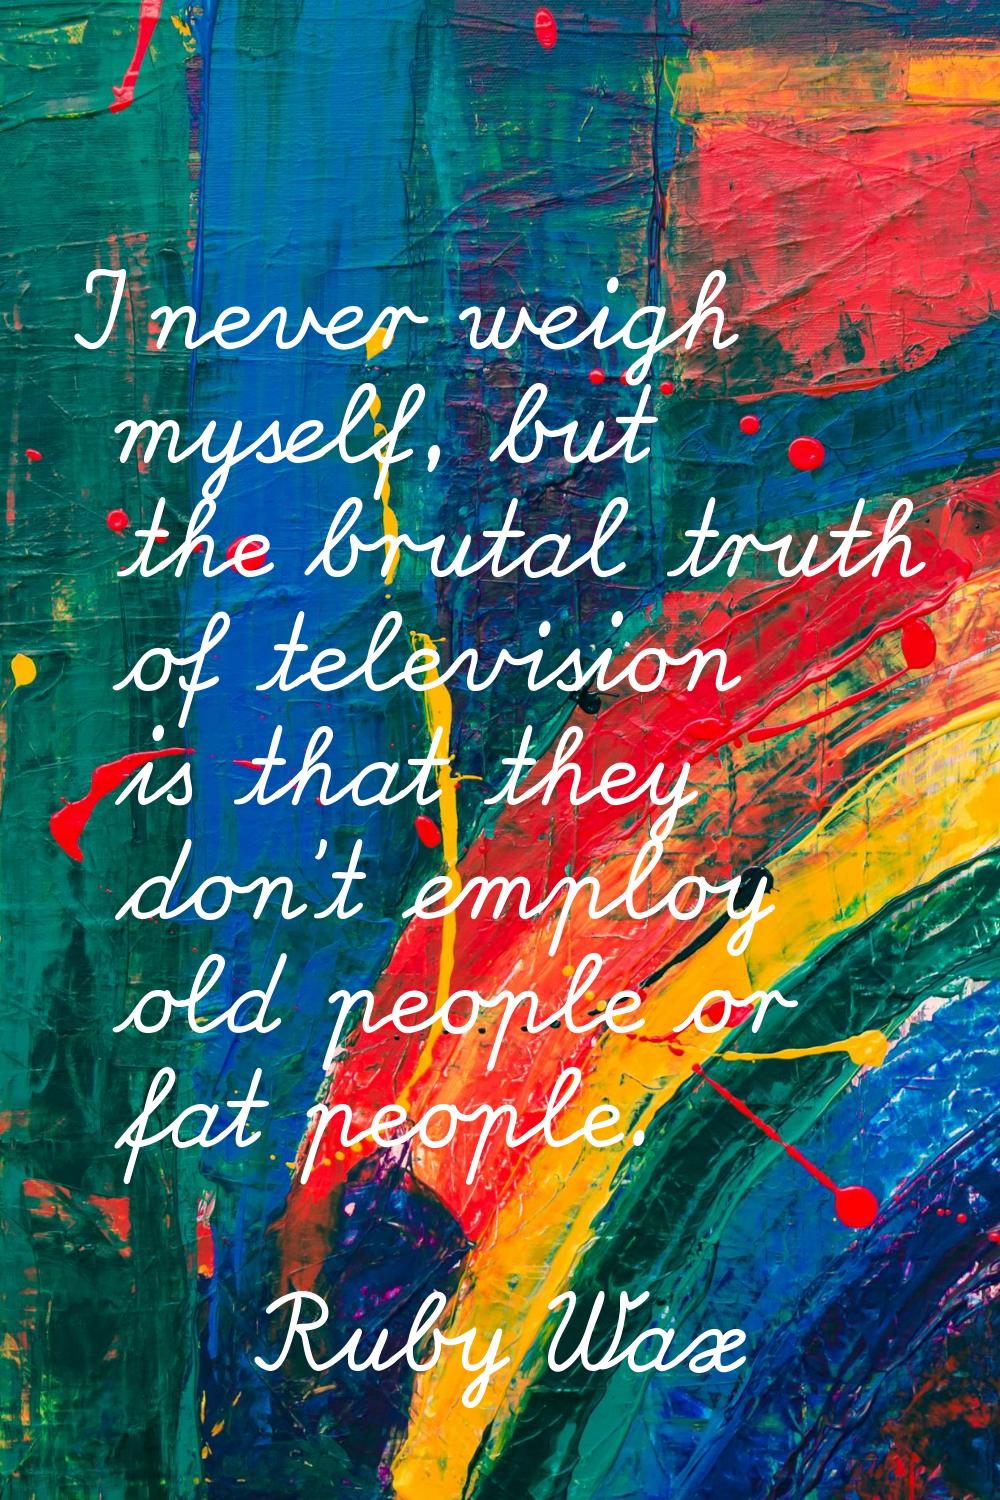 I never weigh myself, but the brutal truth of television is that they don't employ old people or fa